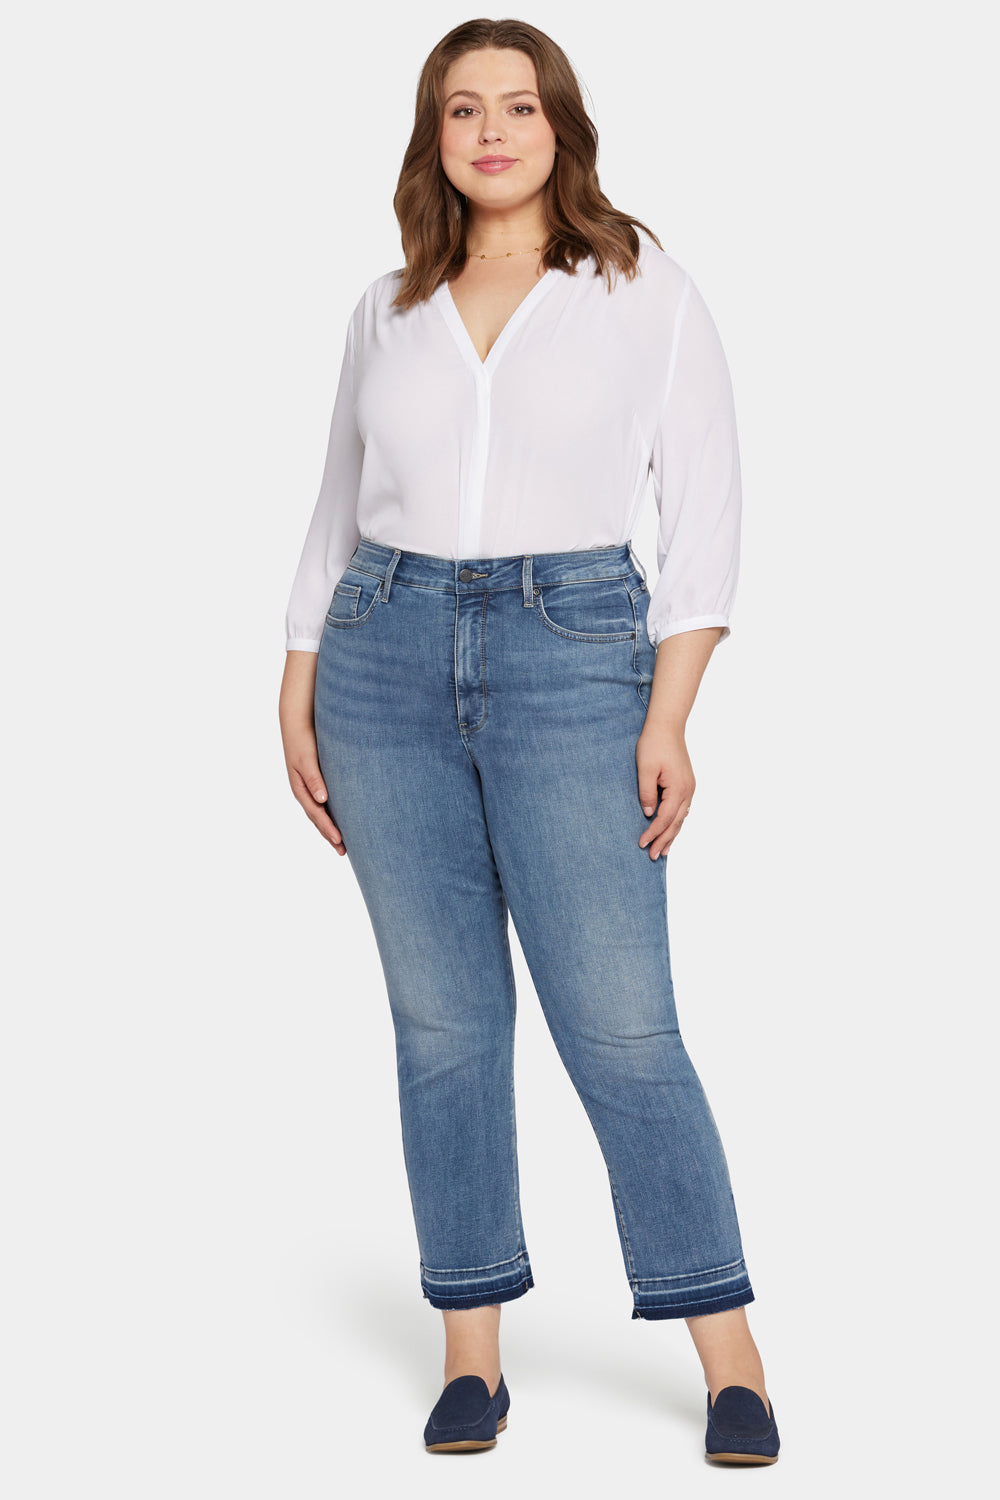 NYDJ Marilyn Straight Ankle Jeans In Petite Plus Size In Cool Embrace® Denim With High Rise And Released Hems - Fantasy